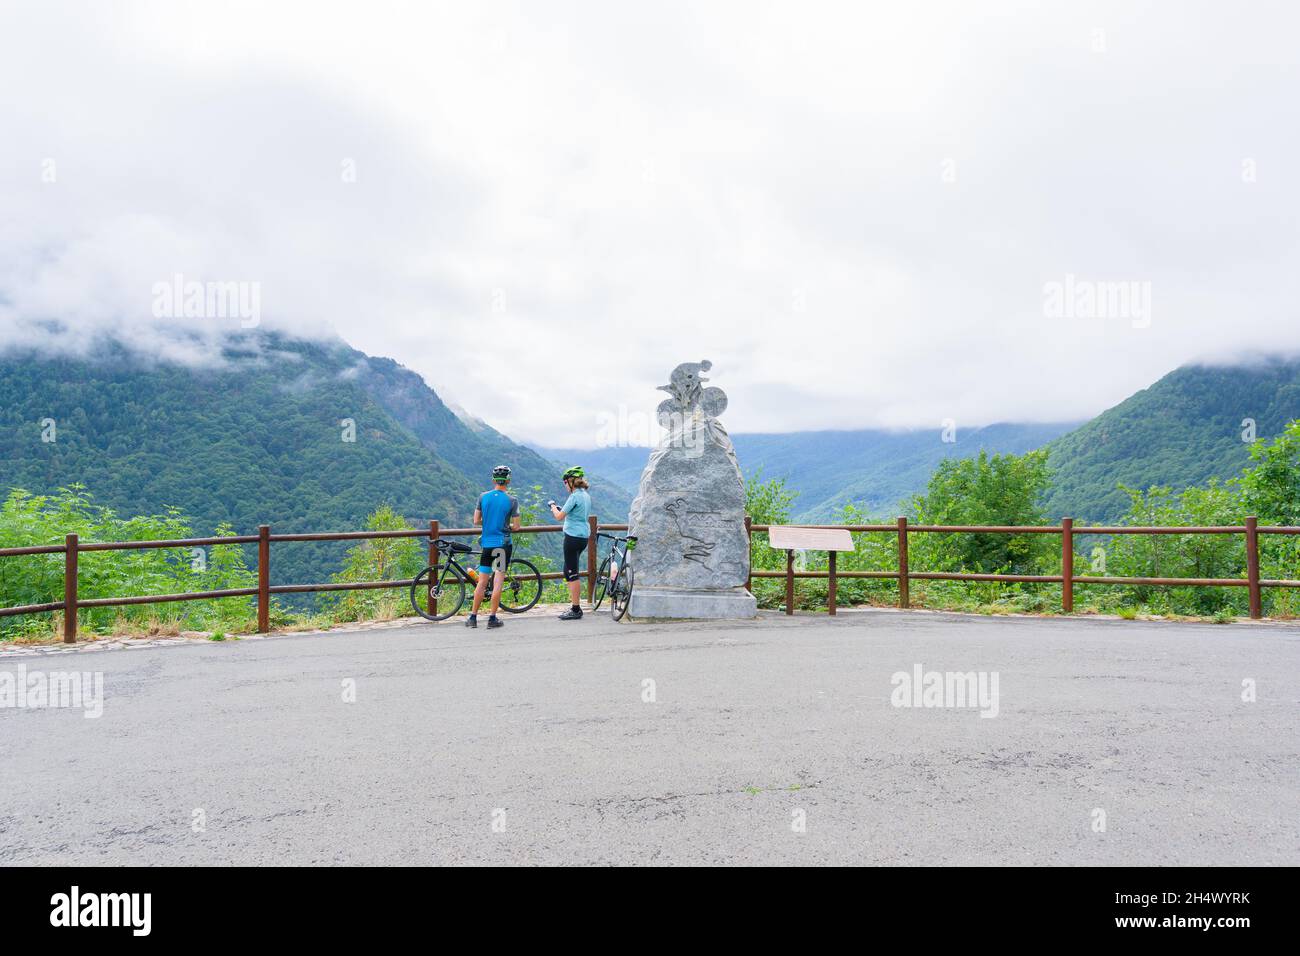 LLEIDA, SPAIN - JULY 28, 2021: Image of a man and a woman cyclists resting on top of the mountain in a viewpoint next to a tour de france monument in Stock Photo